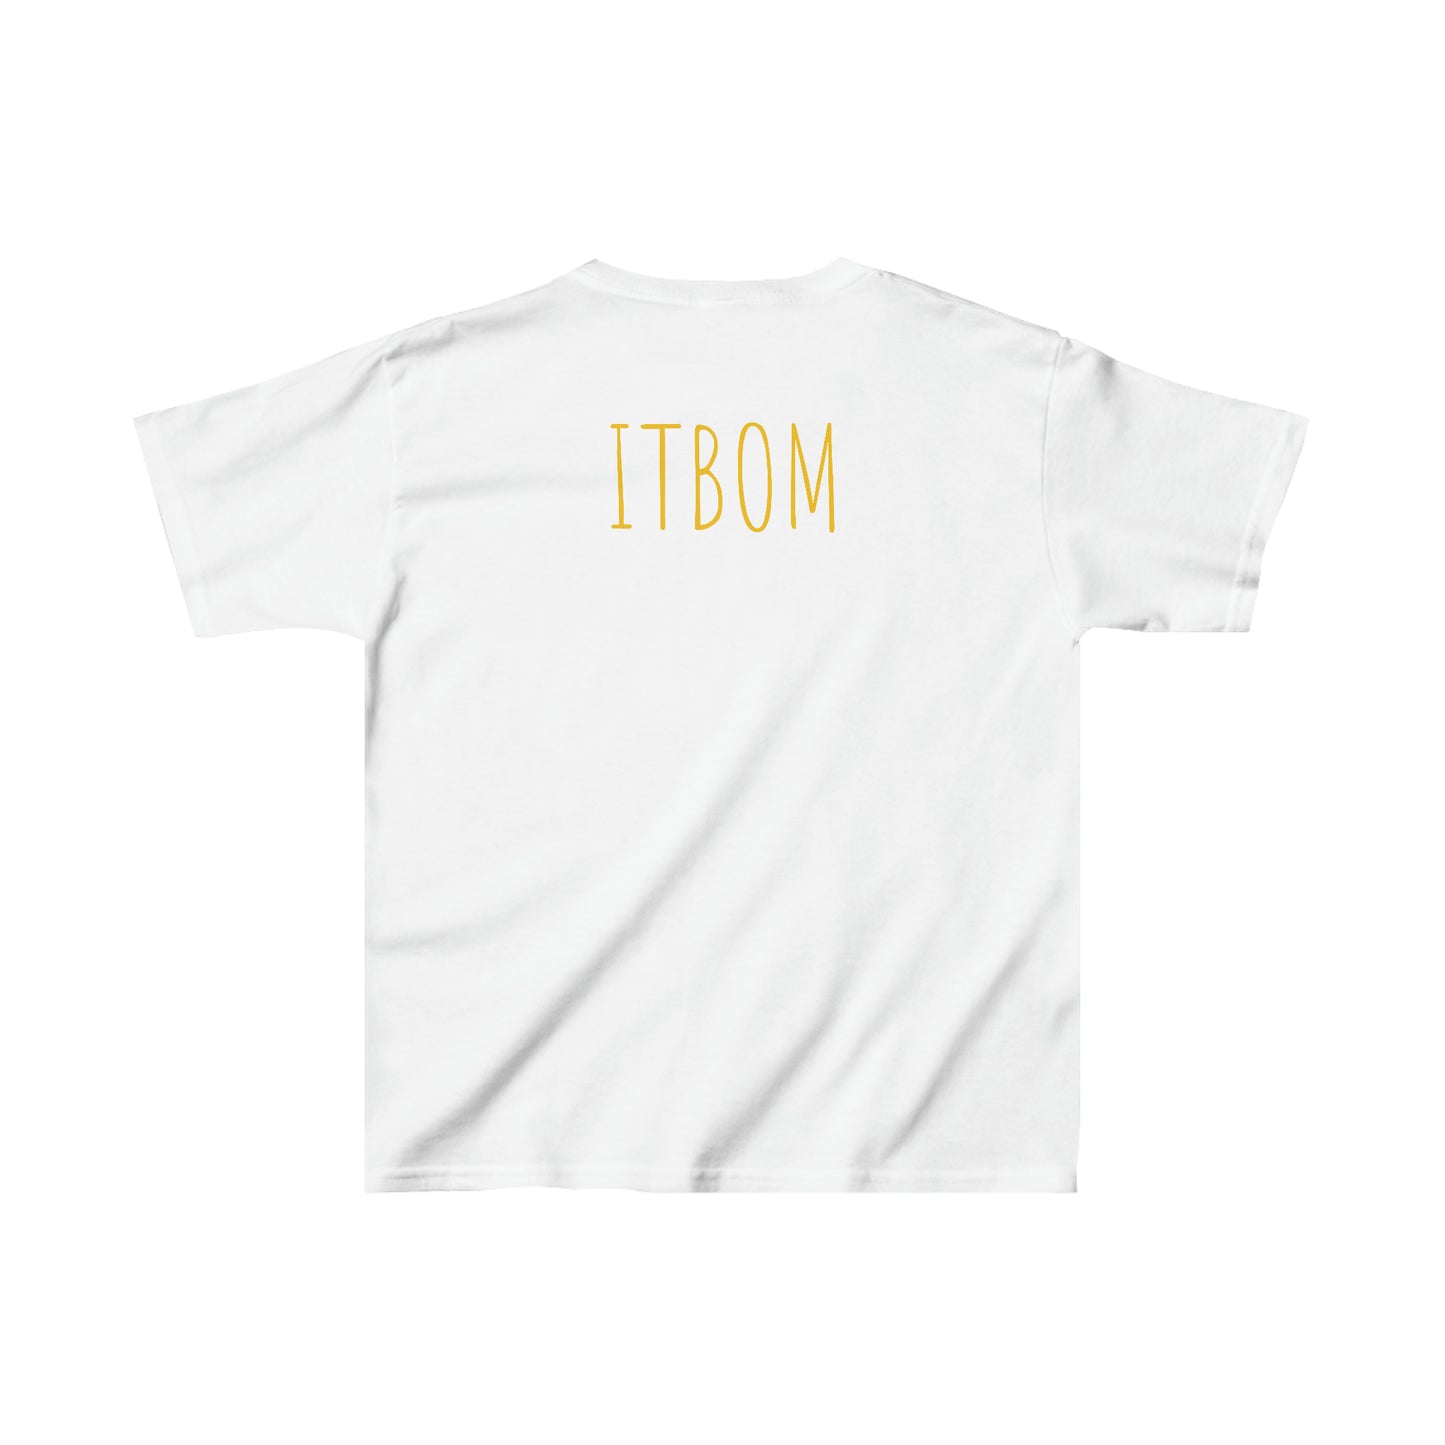 ITBOM I Can Try - Eagle Feather Boss Big Kids Regular Fit Heavy Cotton Short Sleeve Tee XS-XL in 7 different Boss-Some colors